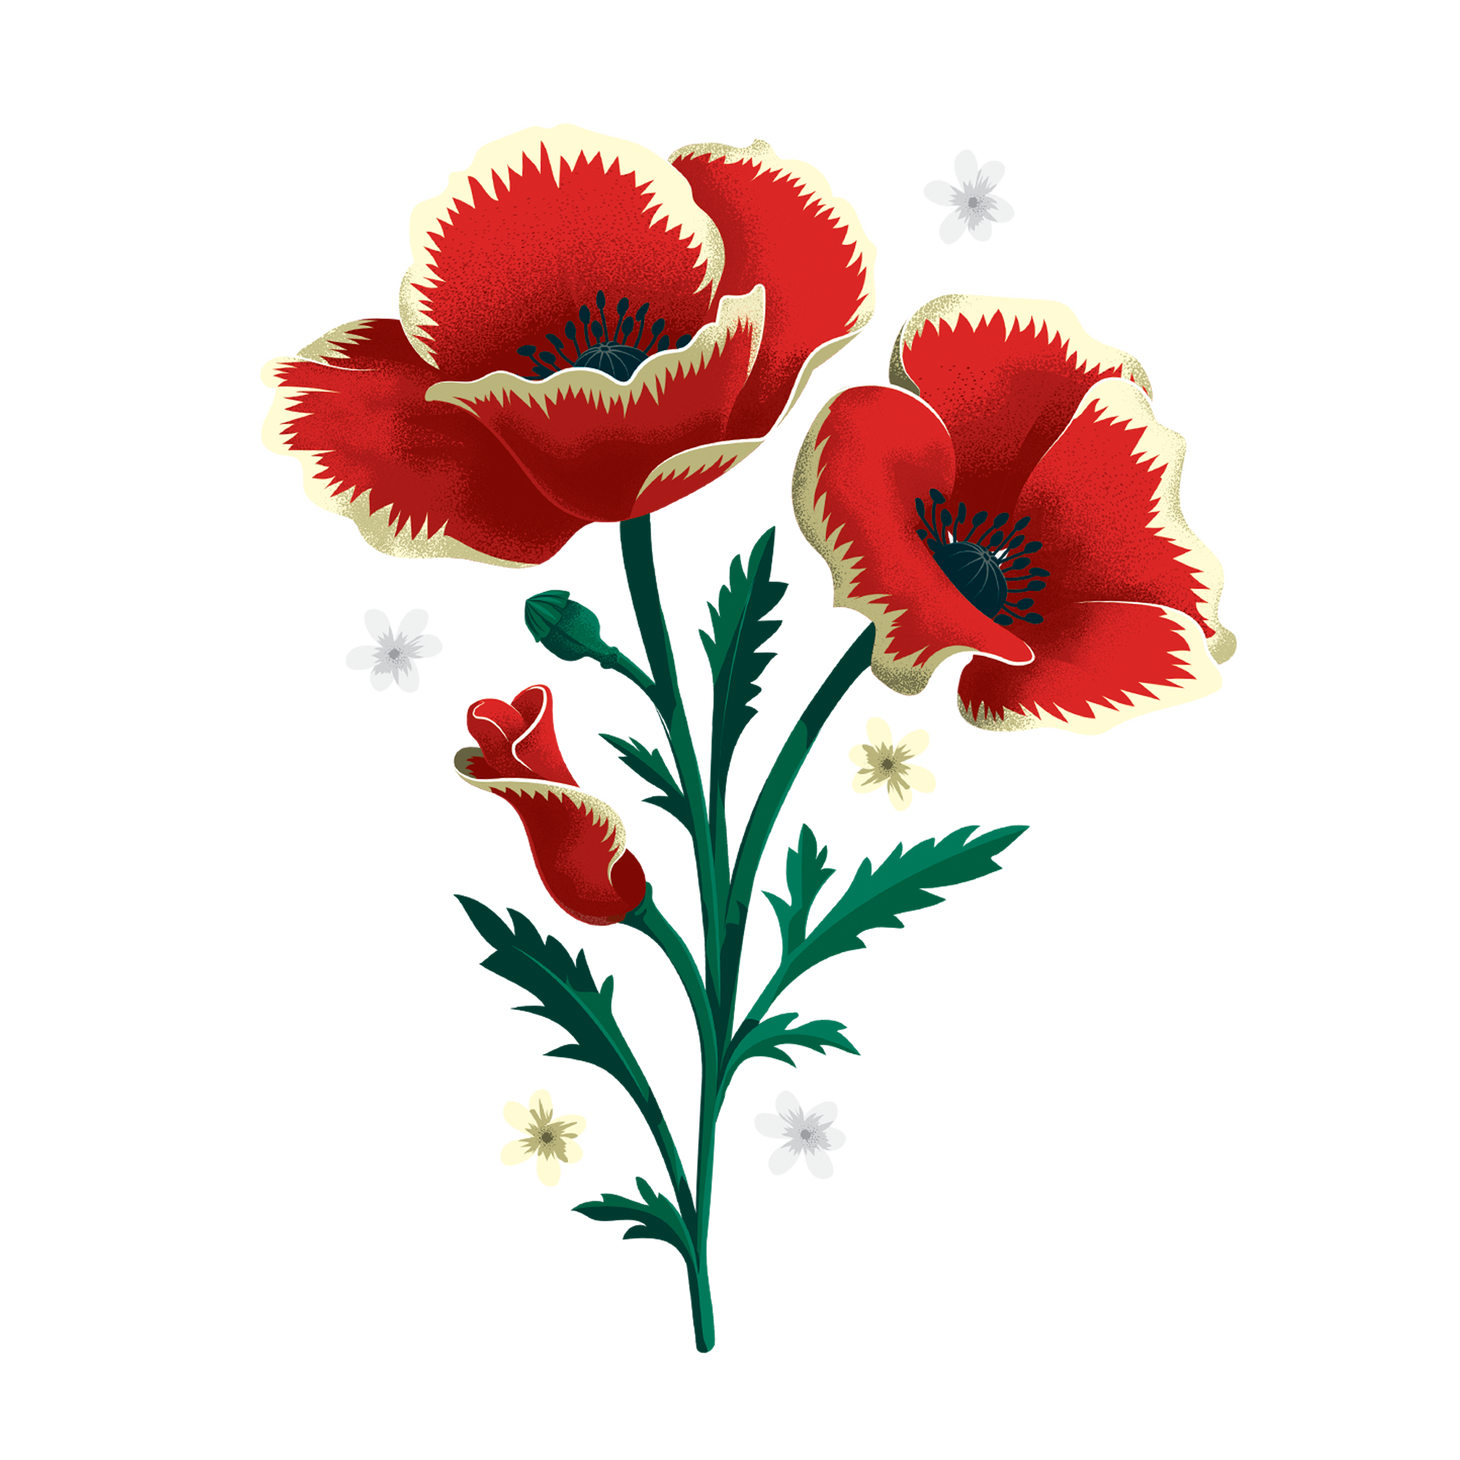 Neotraditional poppy tattoo on the inner arm.